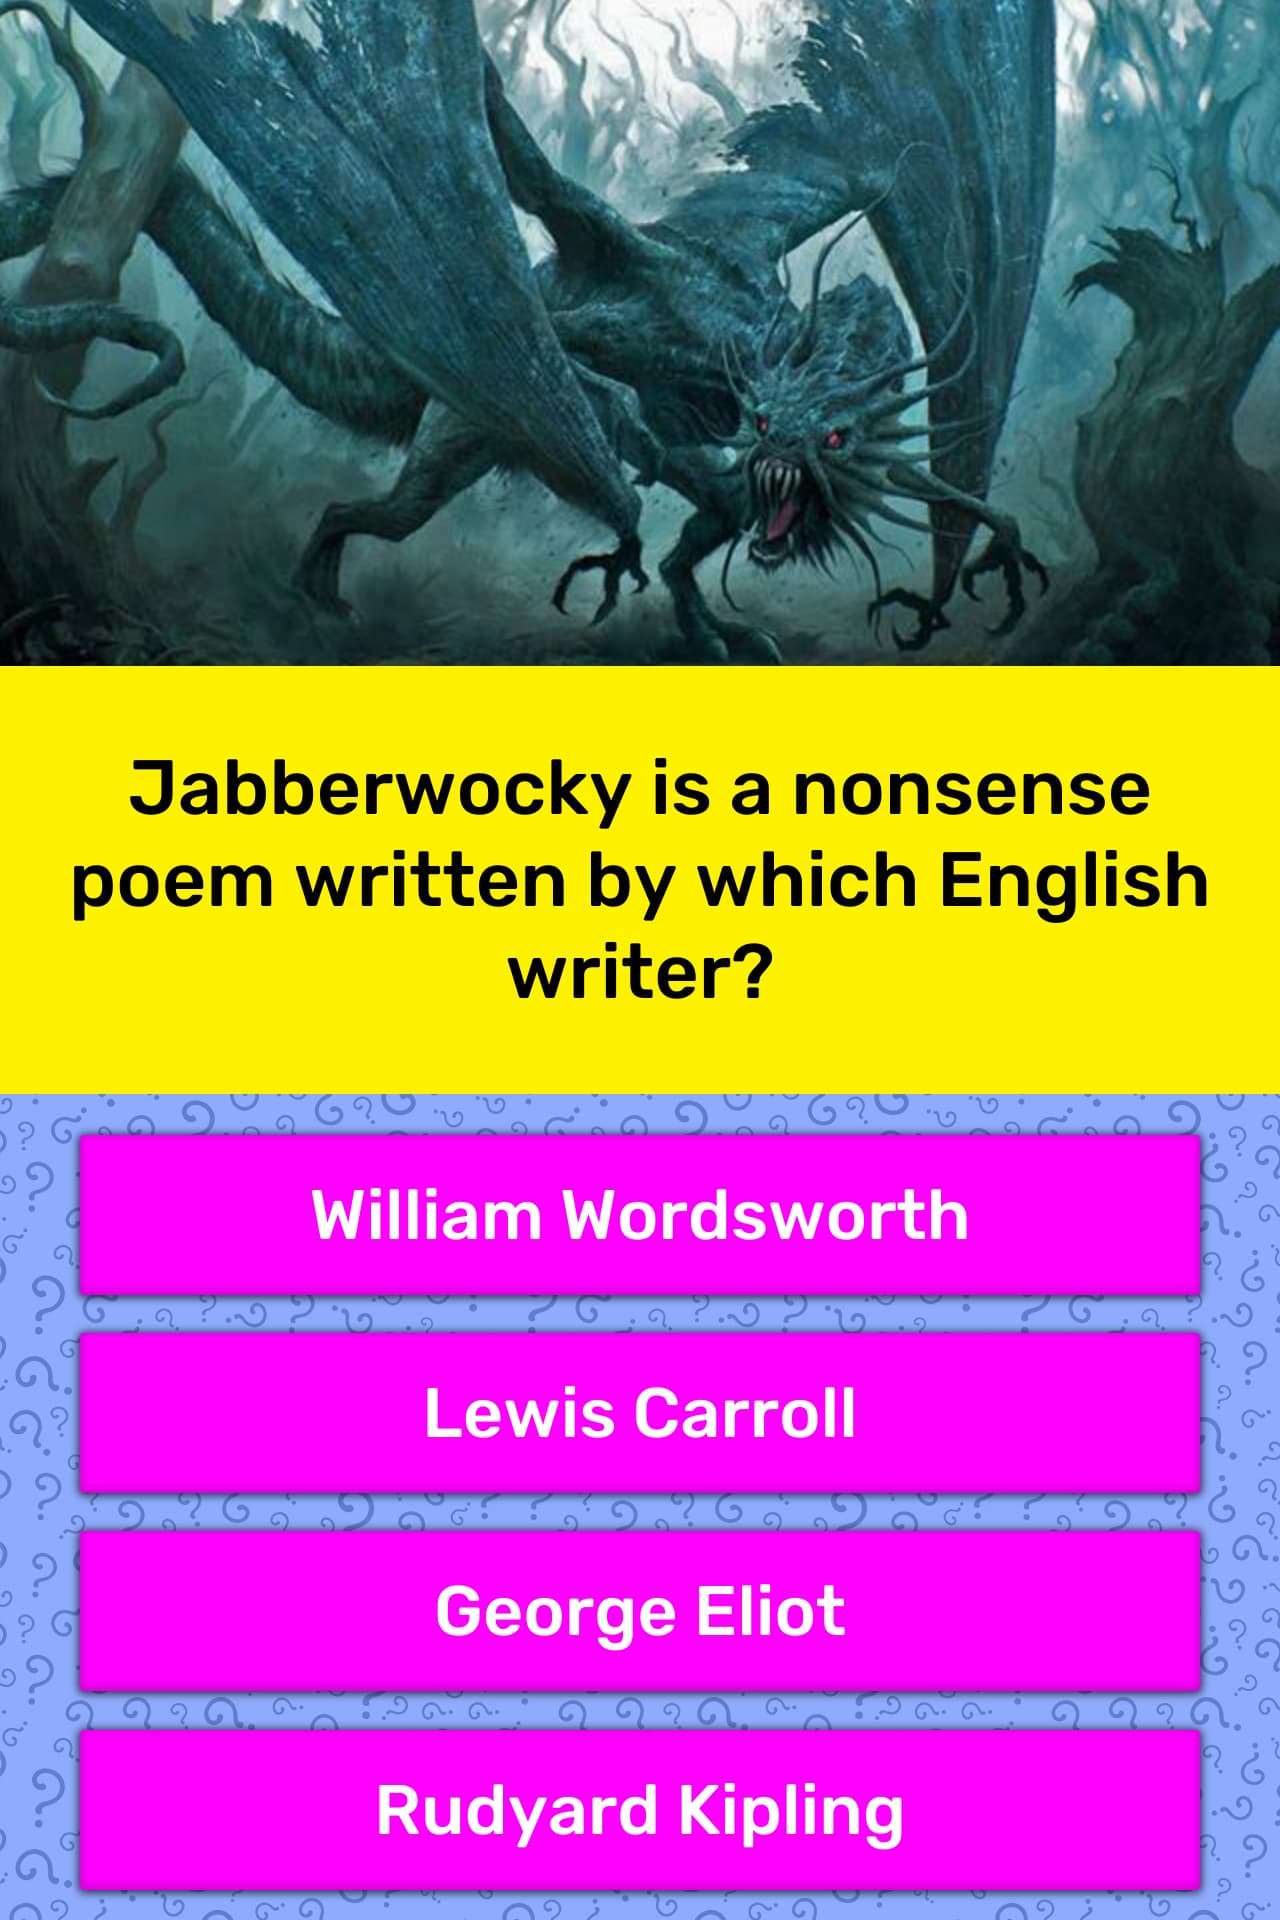 jabberwocky-is-a-nonsense-poem-trivia-answers-quizzclub